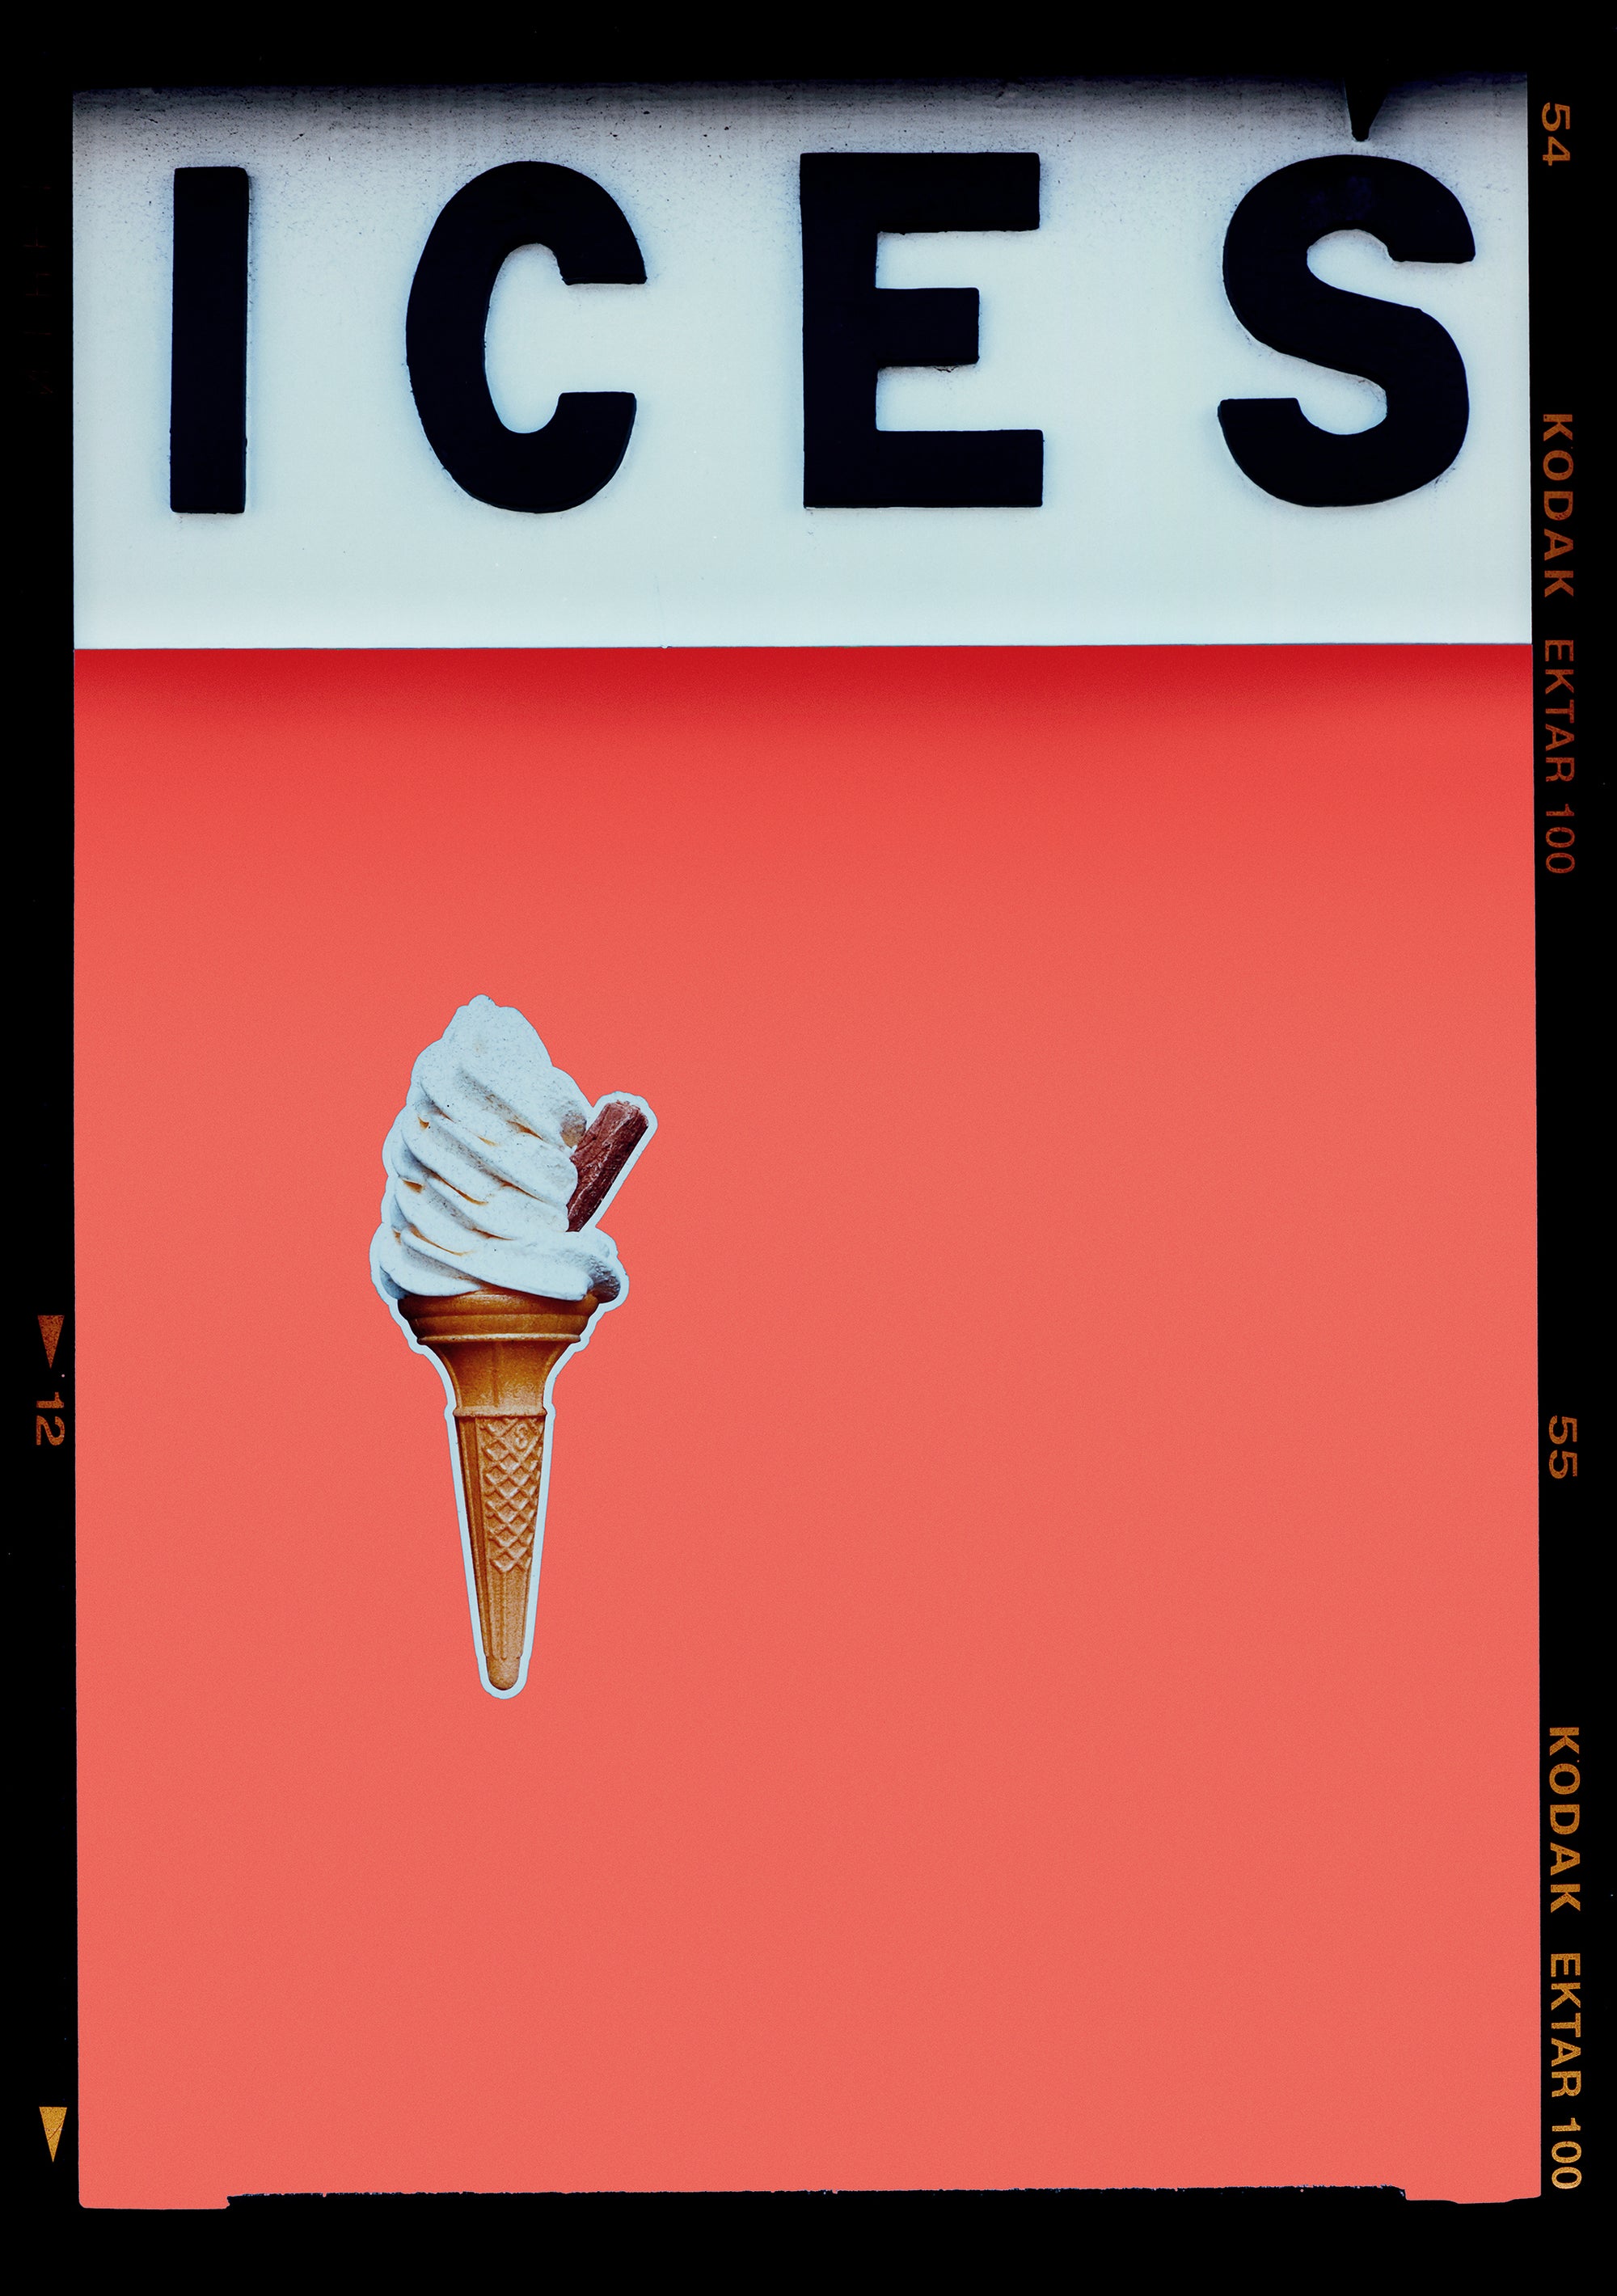 Photograph by Richard Heeps.  At the top black letters spell out ICES and below is depicted a 99 icecream cone sitting left of centre against a melondrama red orange coloured background.  